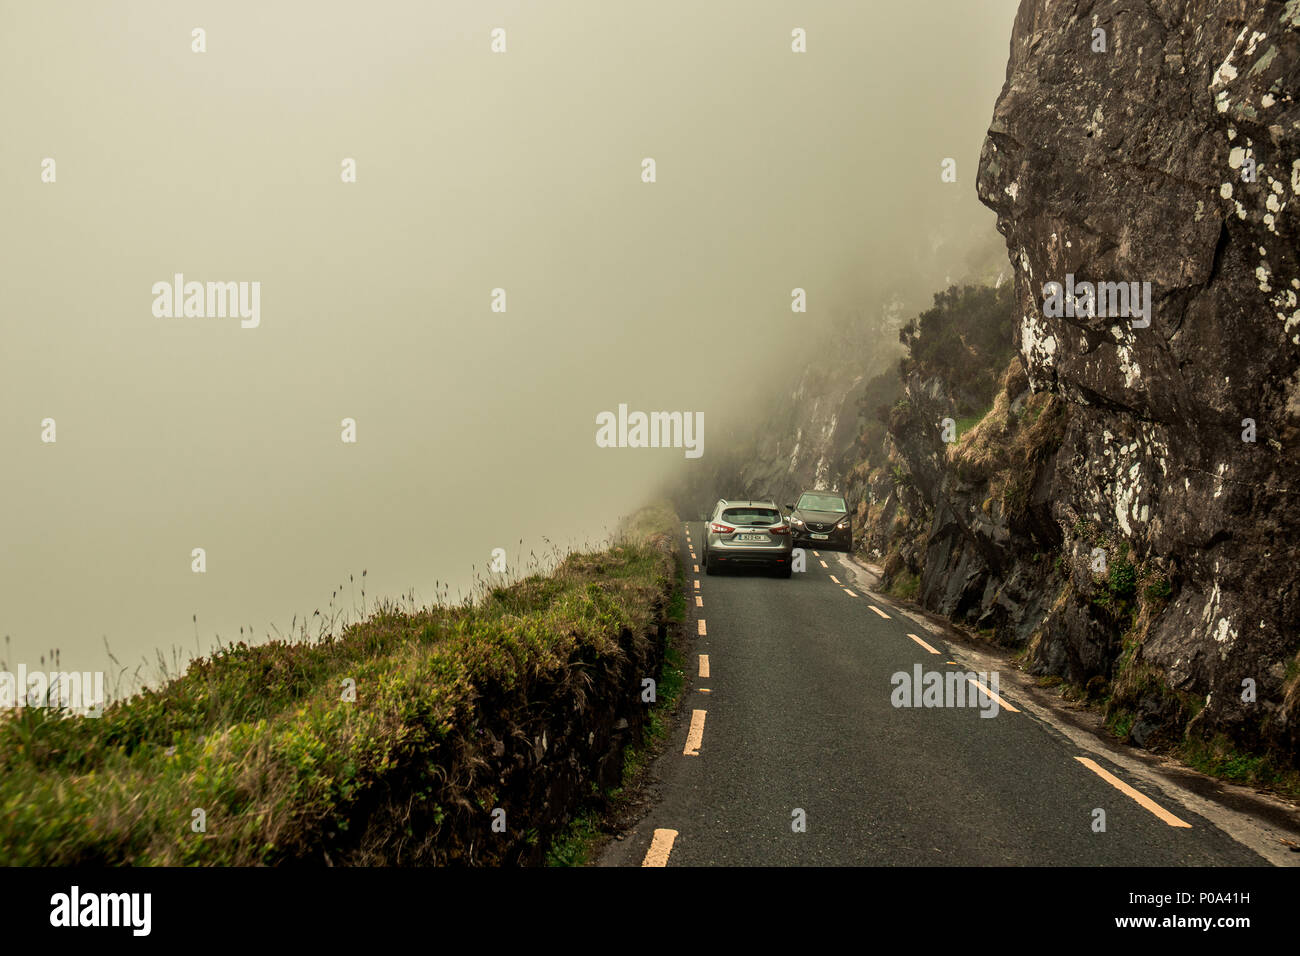 June 5th, 2018, Conor Pass, Ireland - two cars meet along the narrow scenic Conor Pass roads in county Kerry, Ireland, on a foggy day Stock Photo